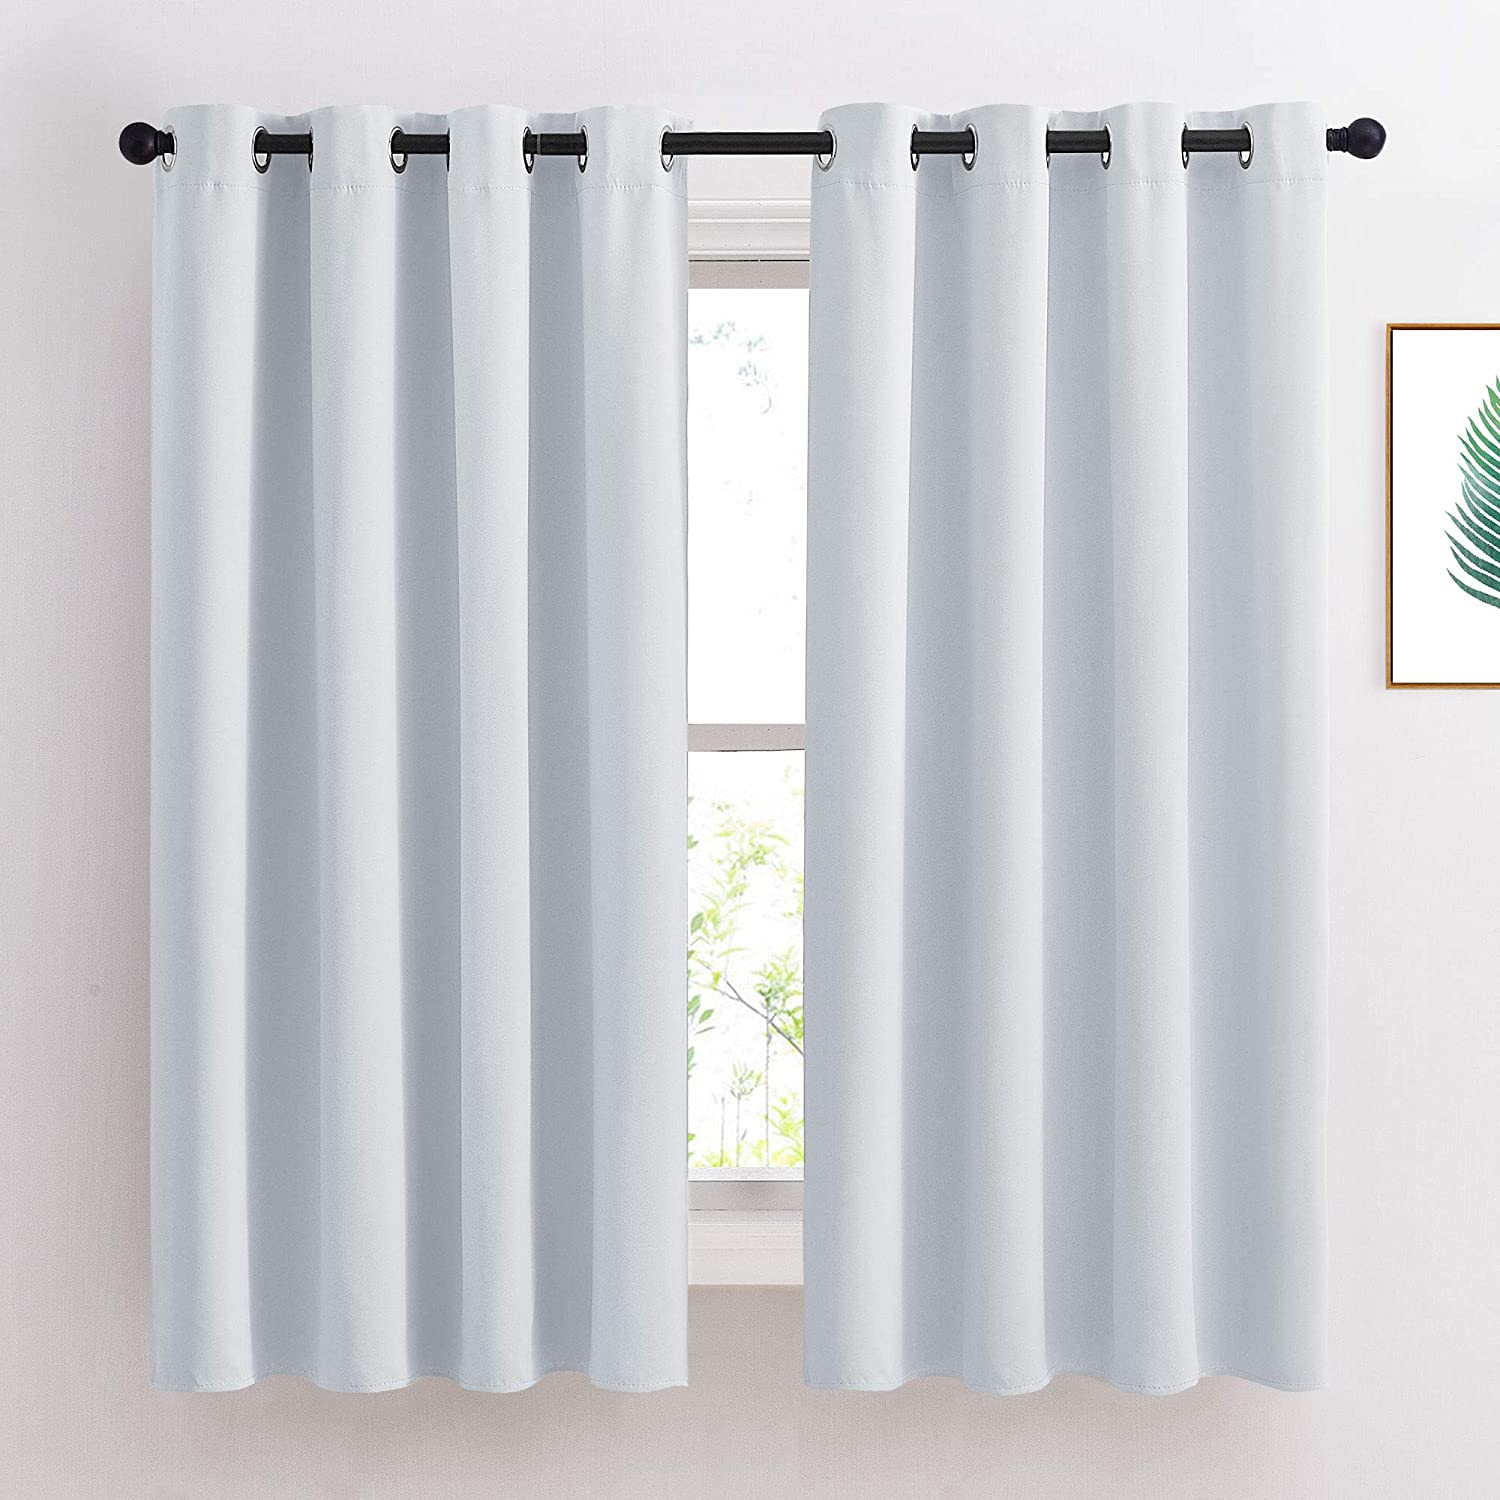 Sound Proof Curtains for Doorway,Soundproof Blanket Winter Thicken Cotton  Door Curtain,Thermal Insulated Keep Warm Blackout Drapes,Windproof並行輸入品 